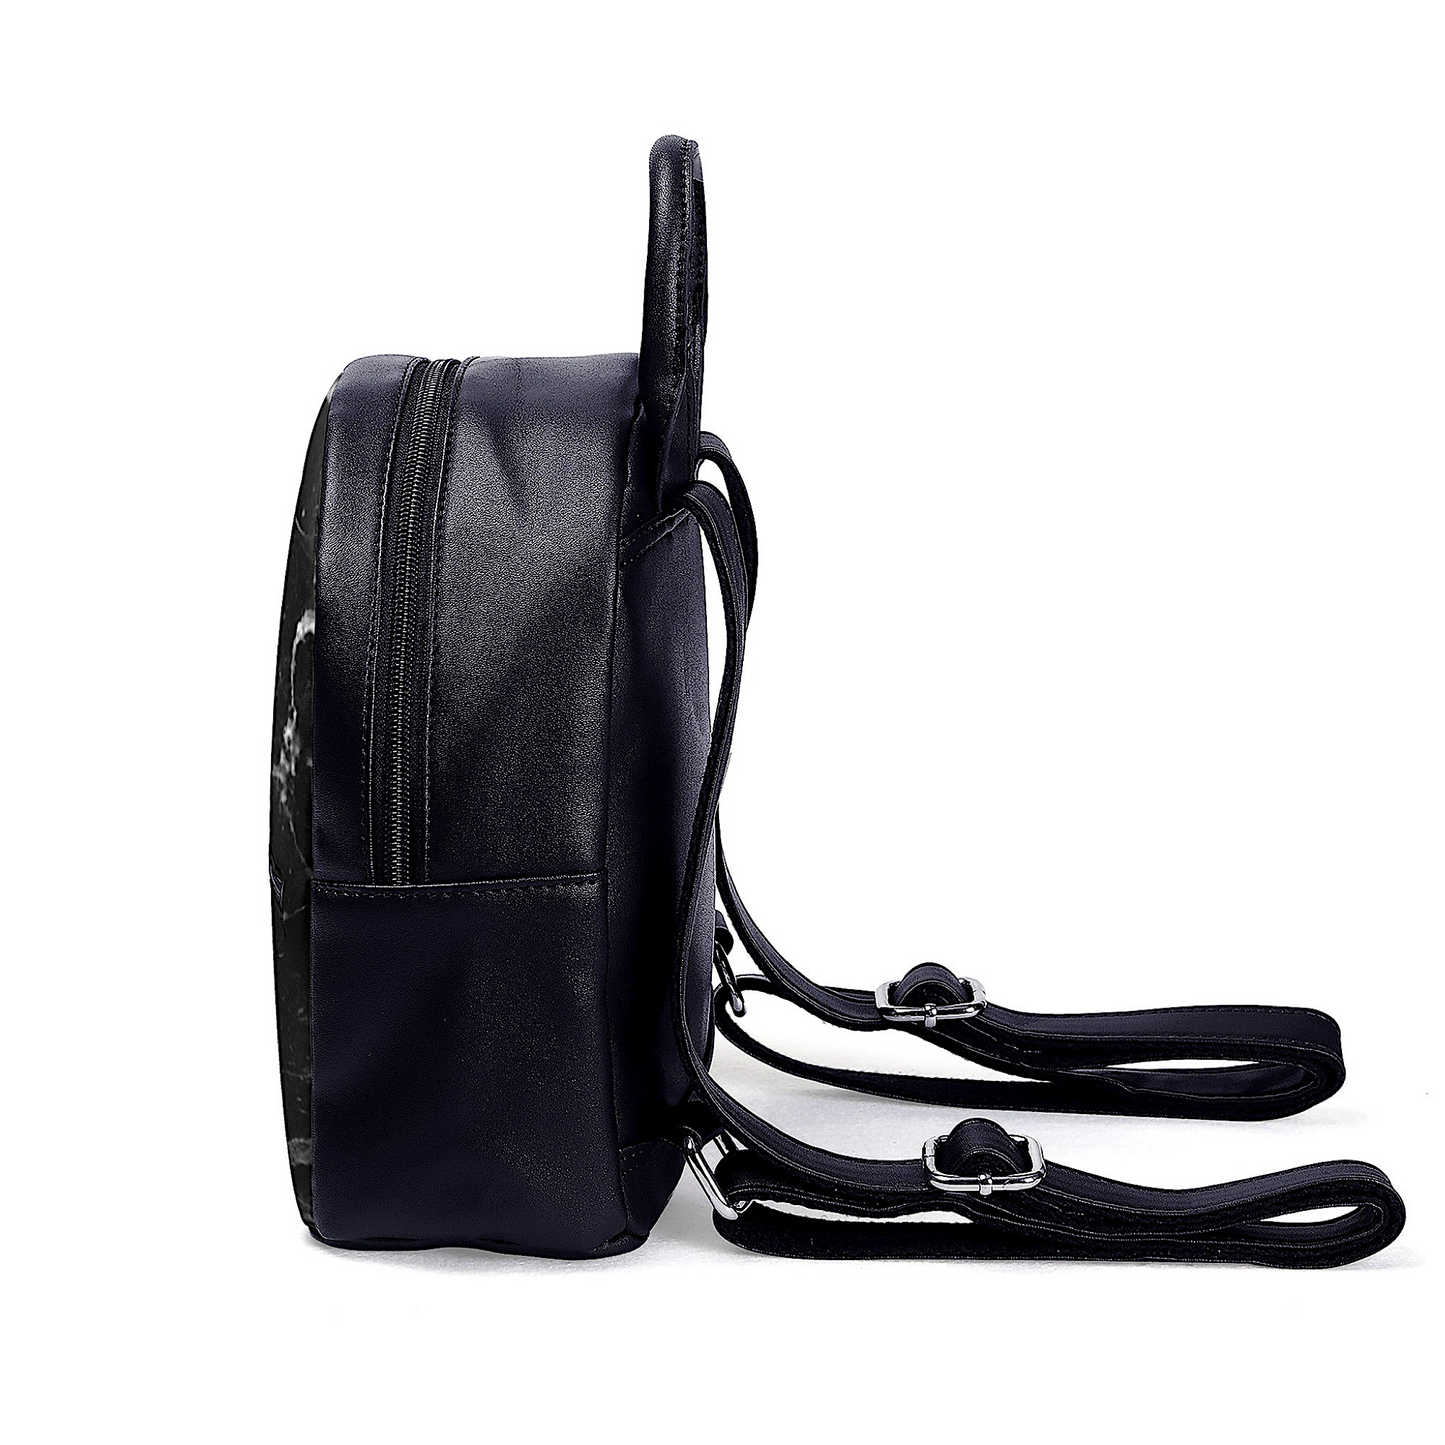 Mass Cast Mini Marble Leather Backpack